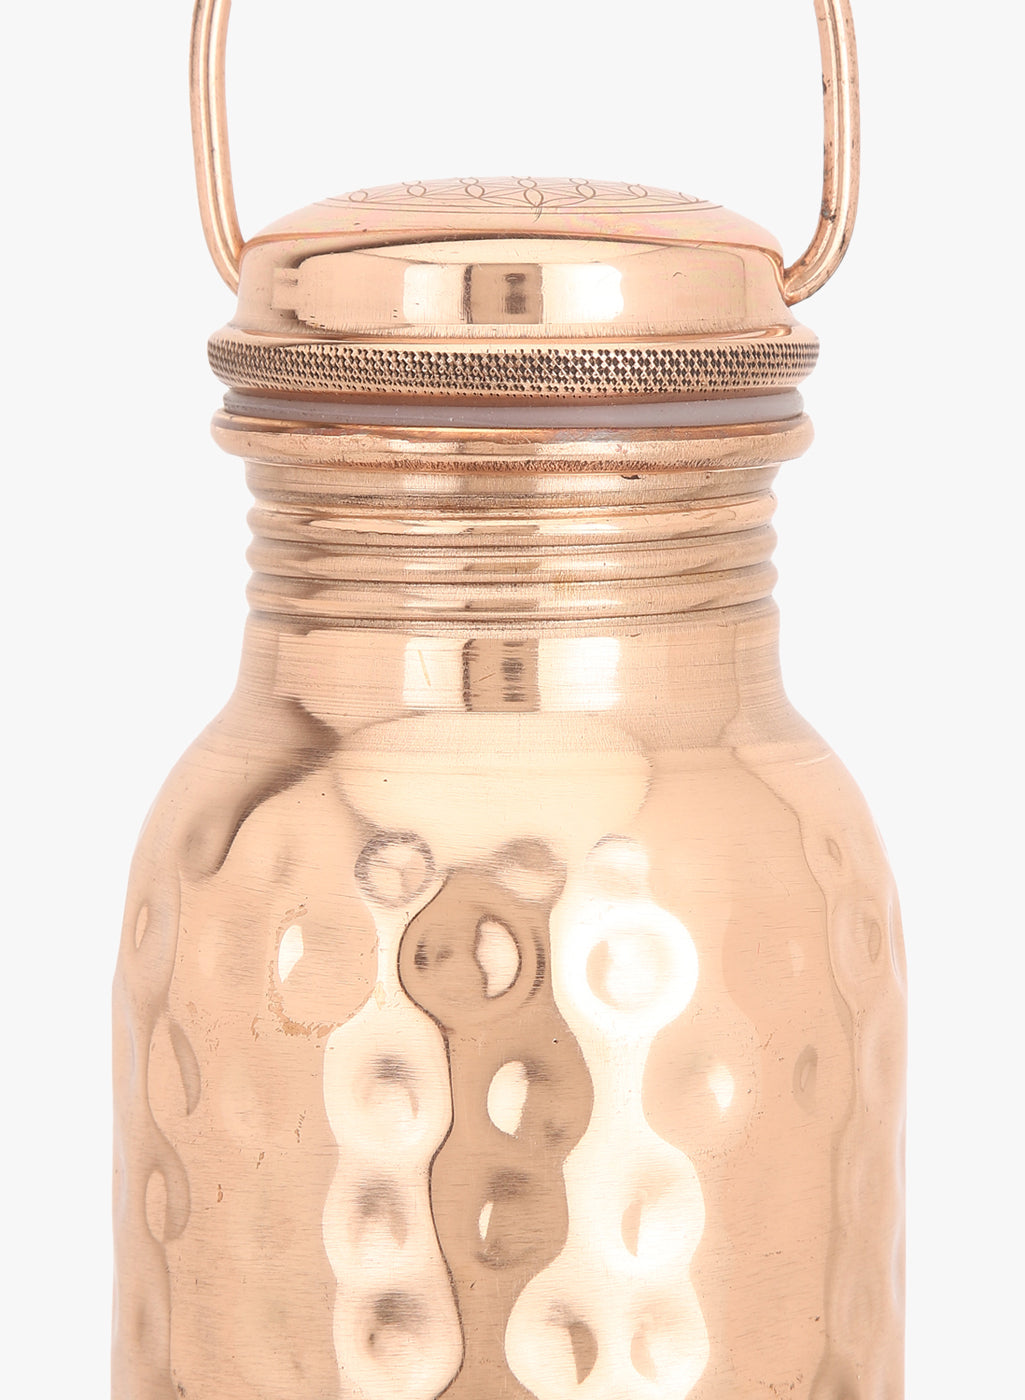 Shakti Warrior Hammered Copper Water Bottle - A blend of elegance and wellness in a unique hammered design, perfect for elevated hydration rituals.